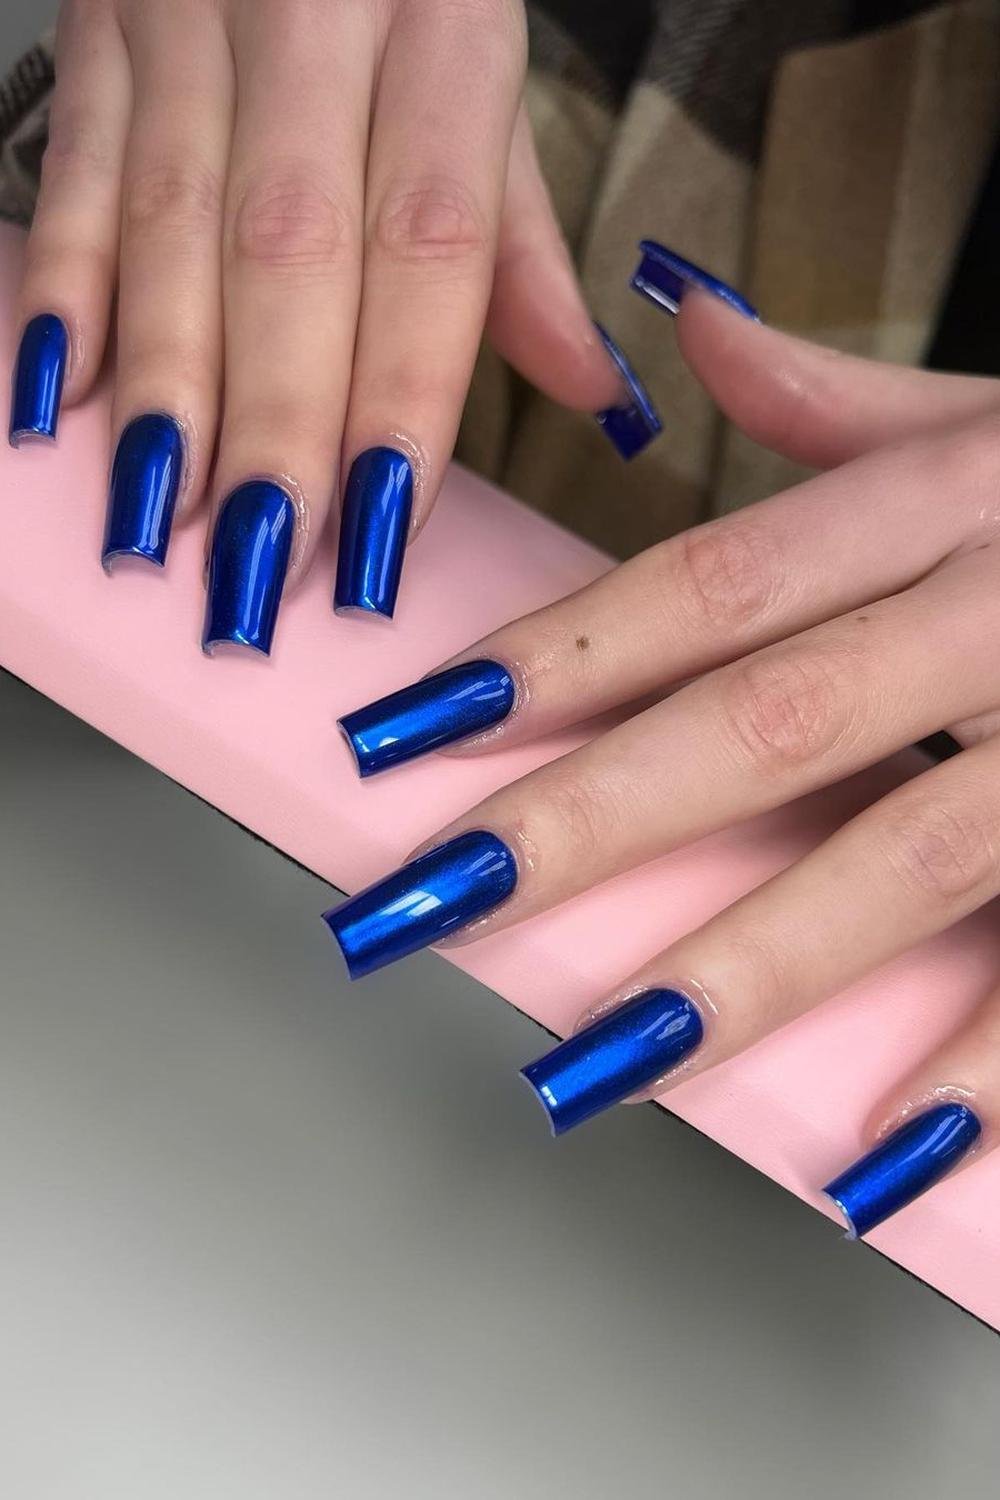 1 - Picture of Blue Chrome Nails